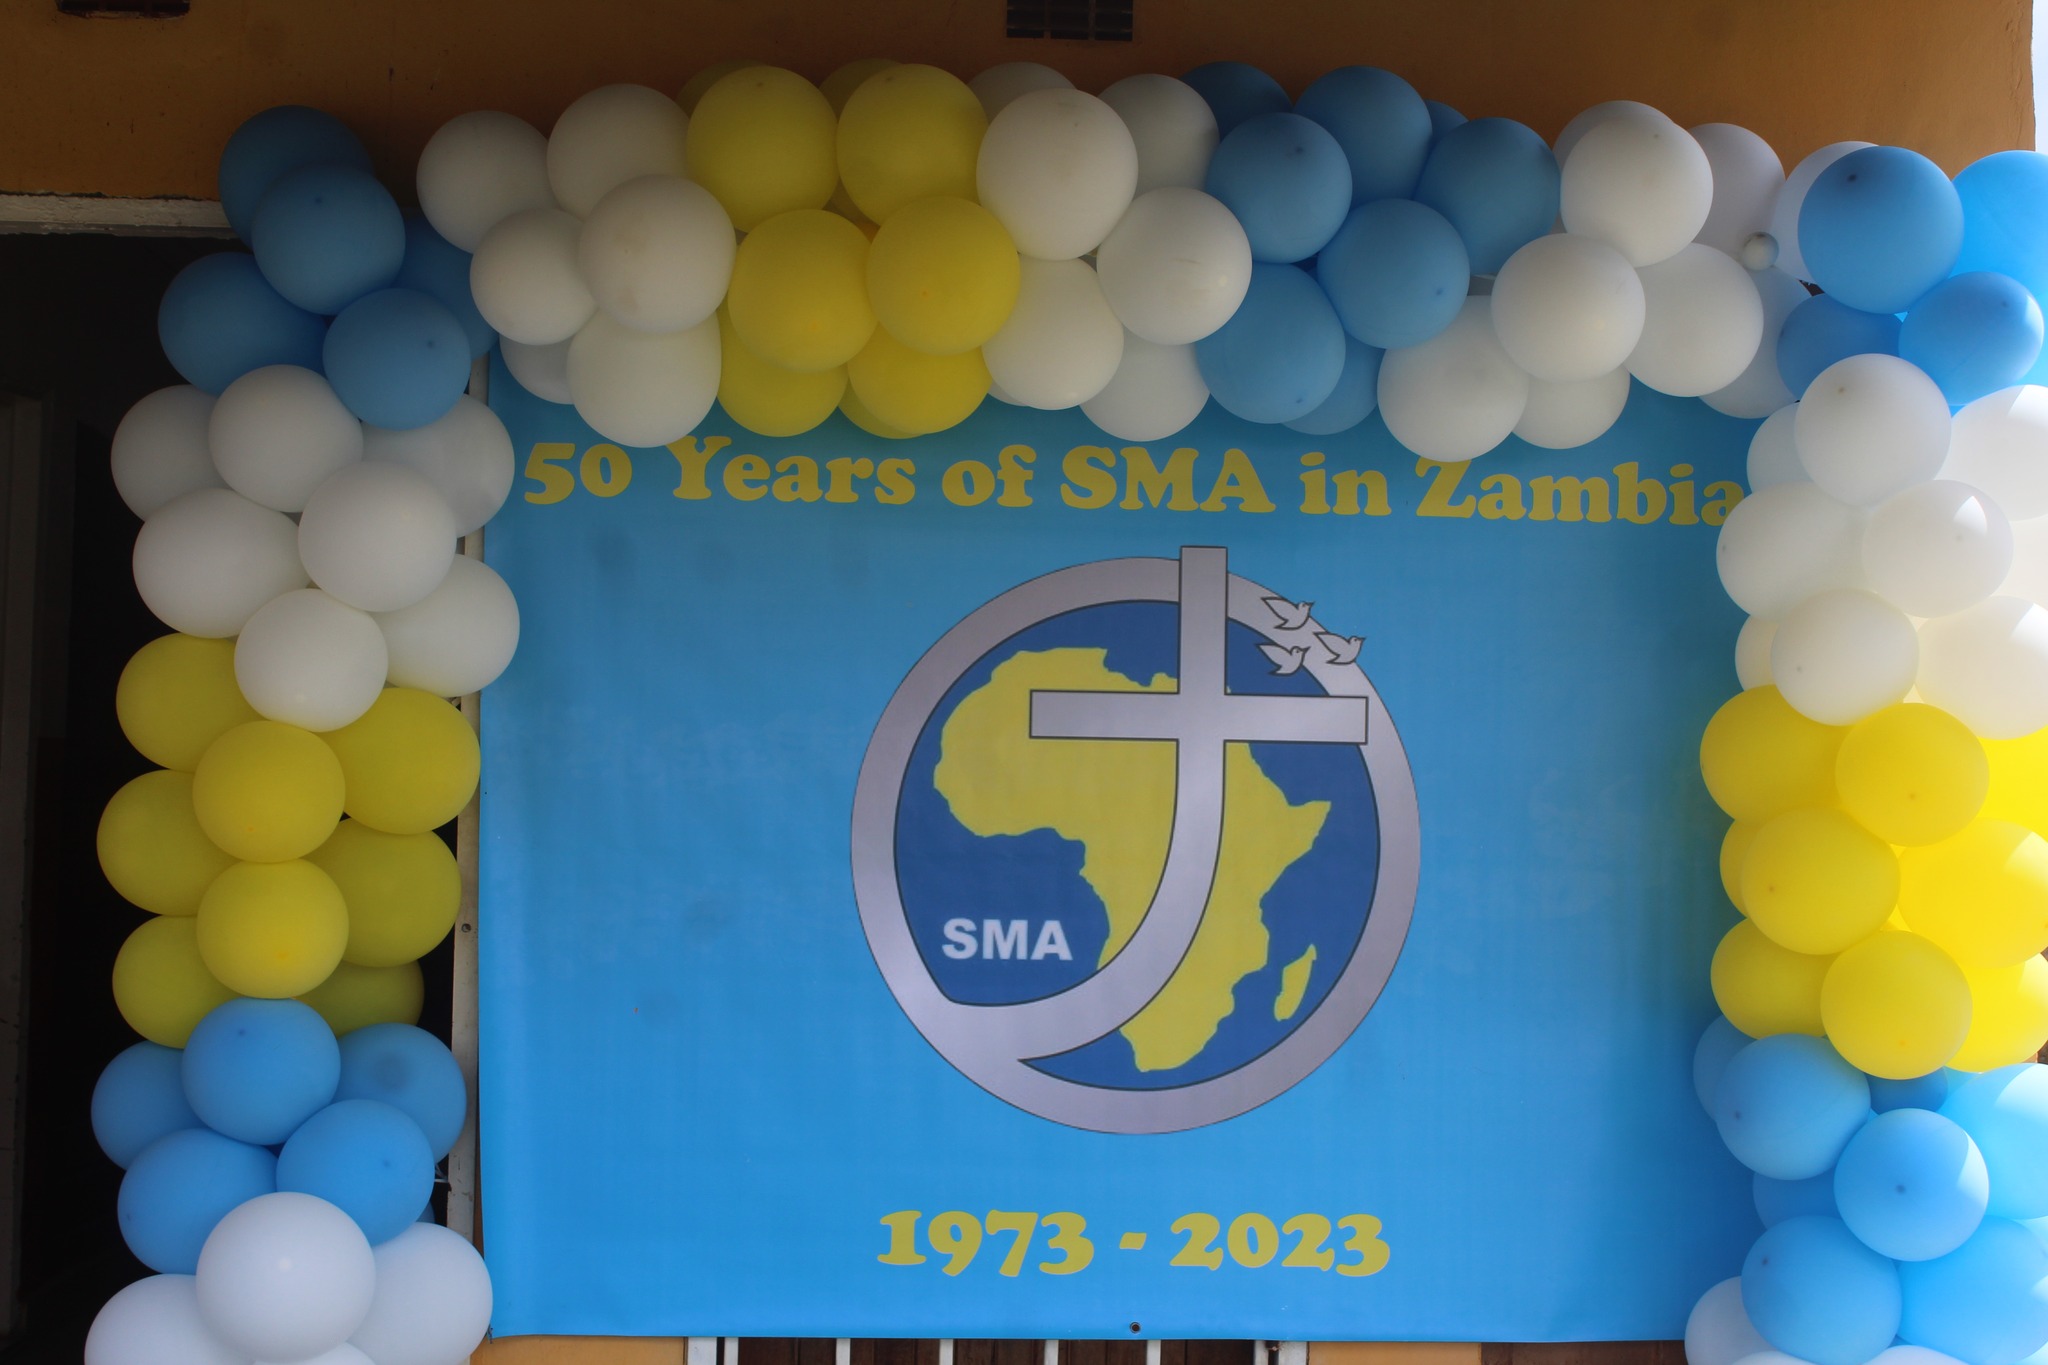 SMA Fathers Mark 50 Years of Service in Zambia.